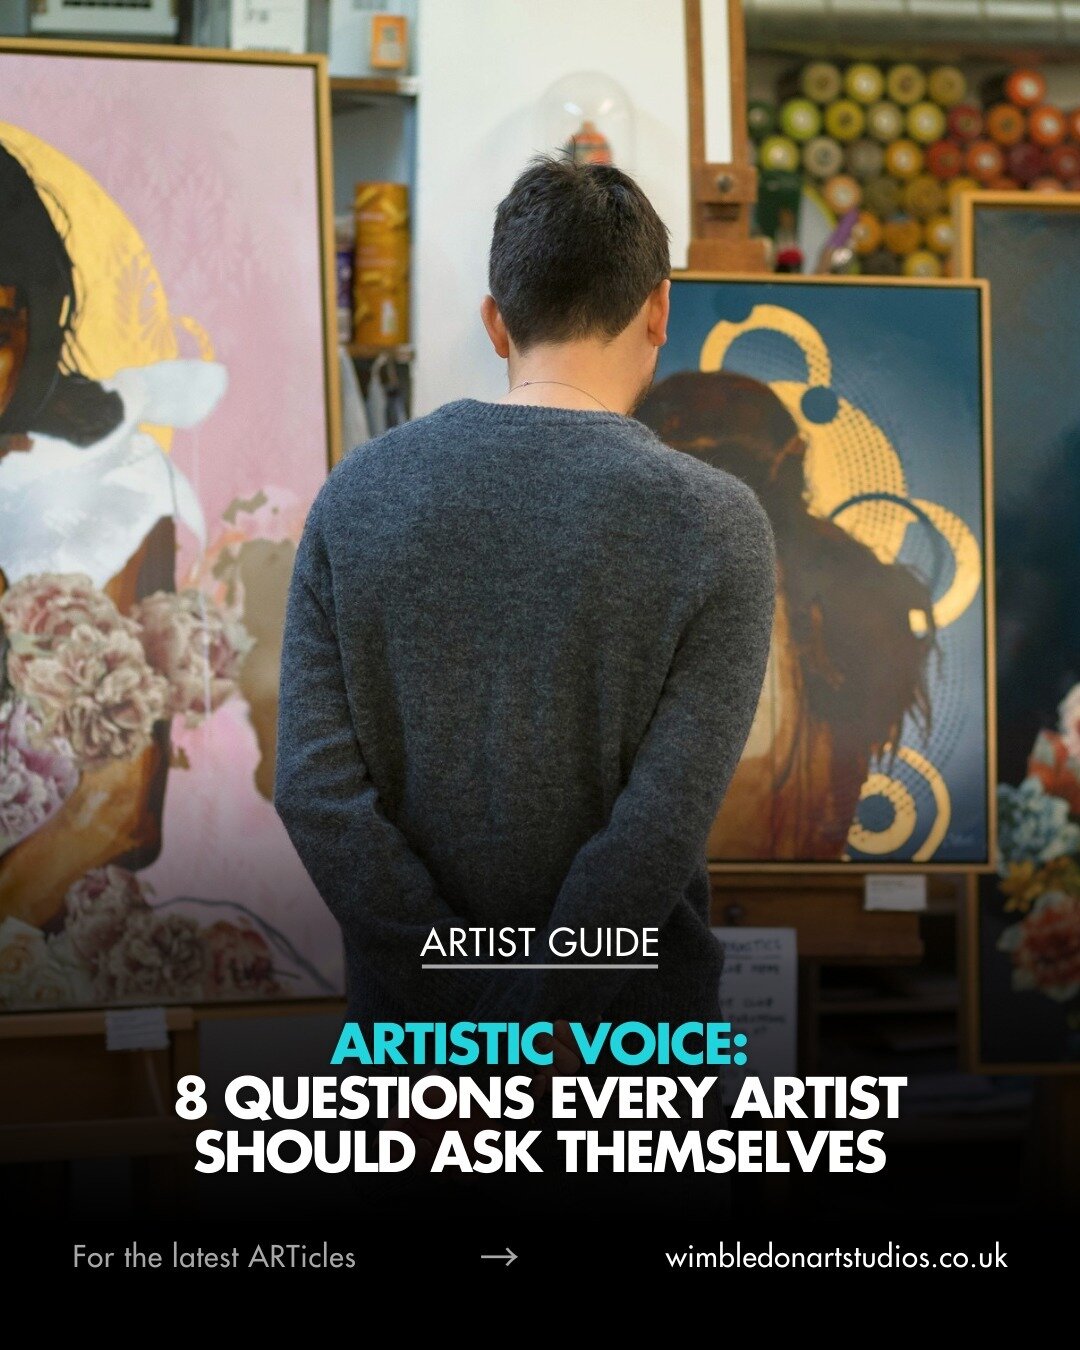 Elevate your artistic essence with these 8 essential questions! 🚀

Self-reflection is a powerful tool for artists seeking to deepen their practice and find their artistic voice. 🤔

By asking yourself the right questions - and embracing the insights